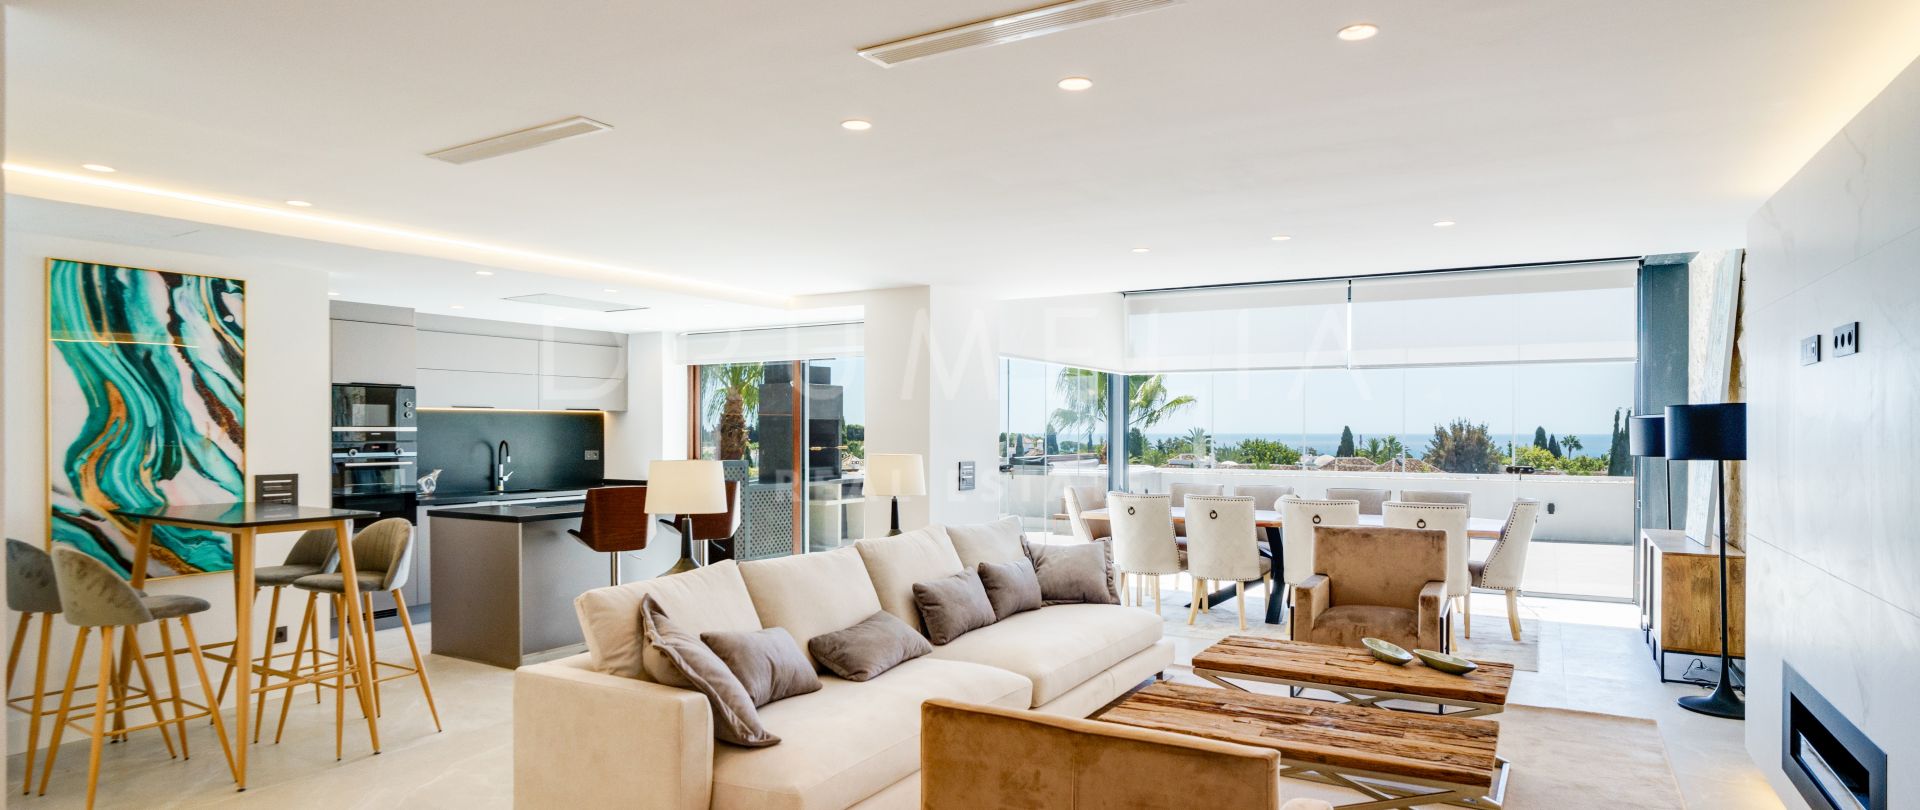 Renovated stylish luxury modern duplex penthouse with panoramic sea views, Marbella Golden Mile.